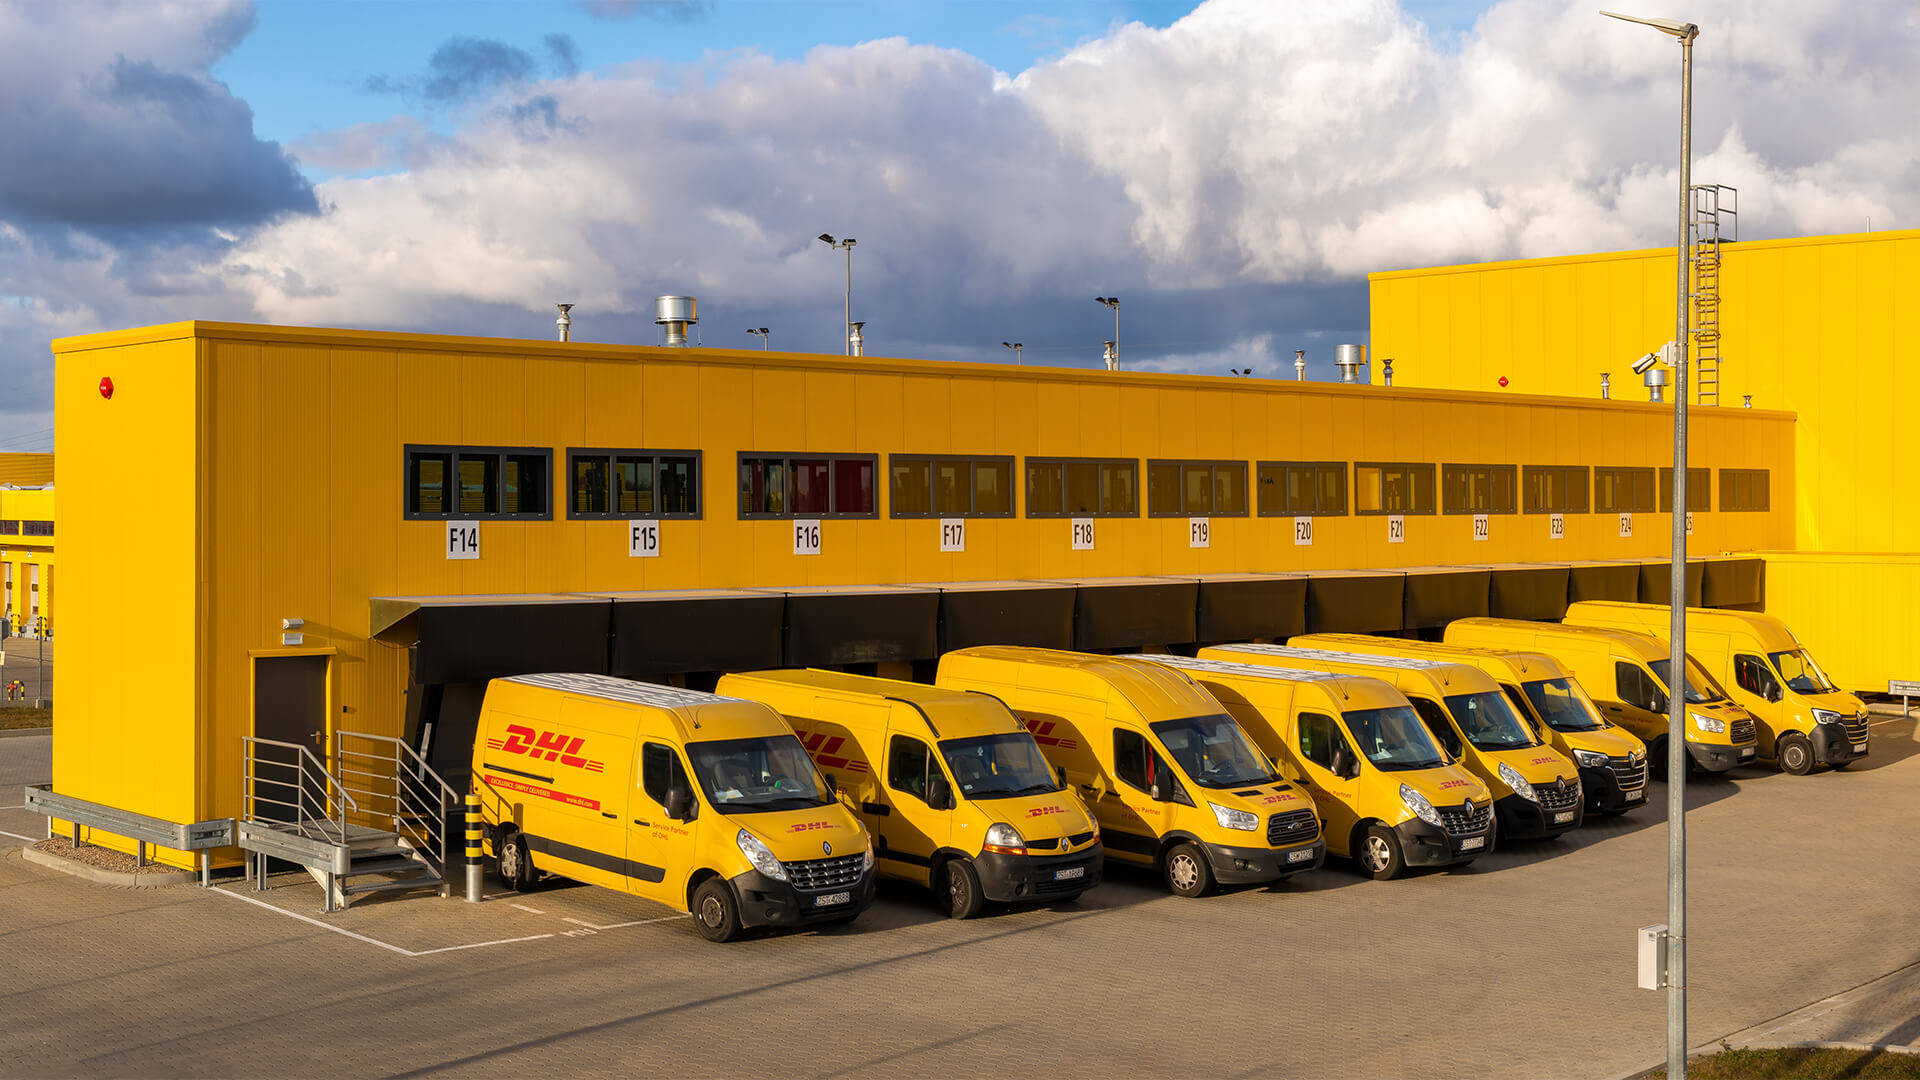 Caption: A Dhl Delivery Van In A Parking Area Background